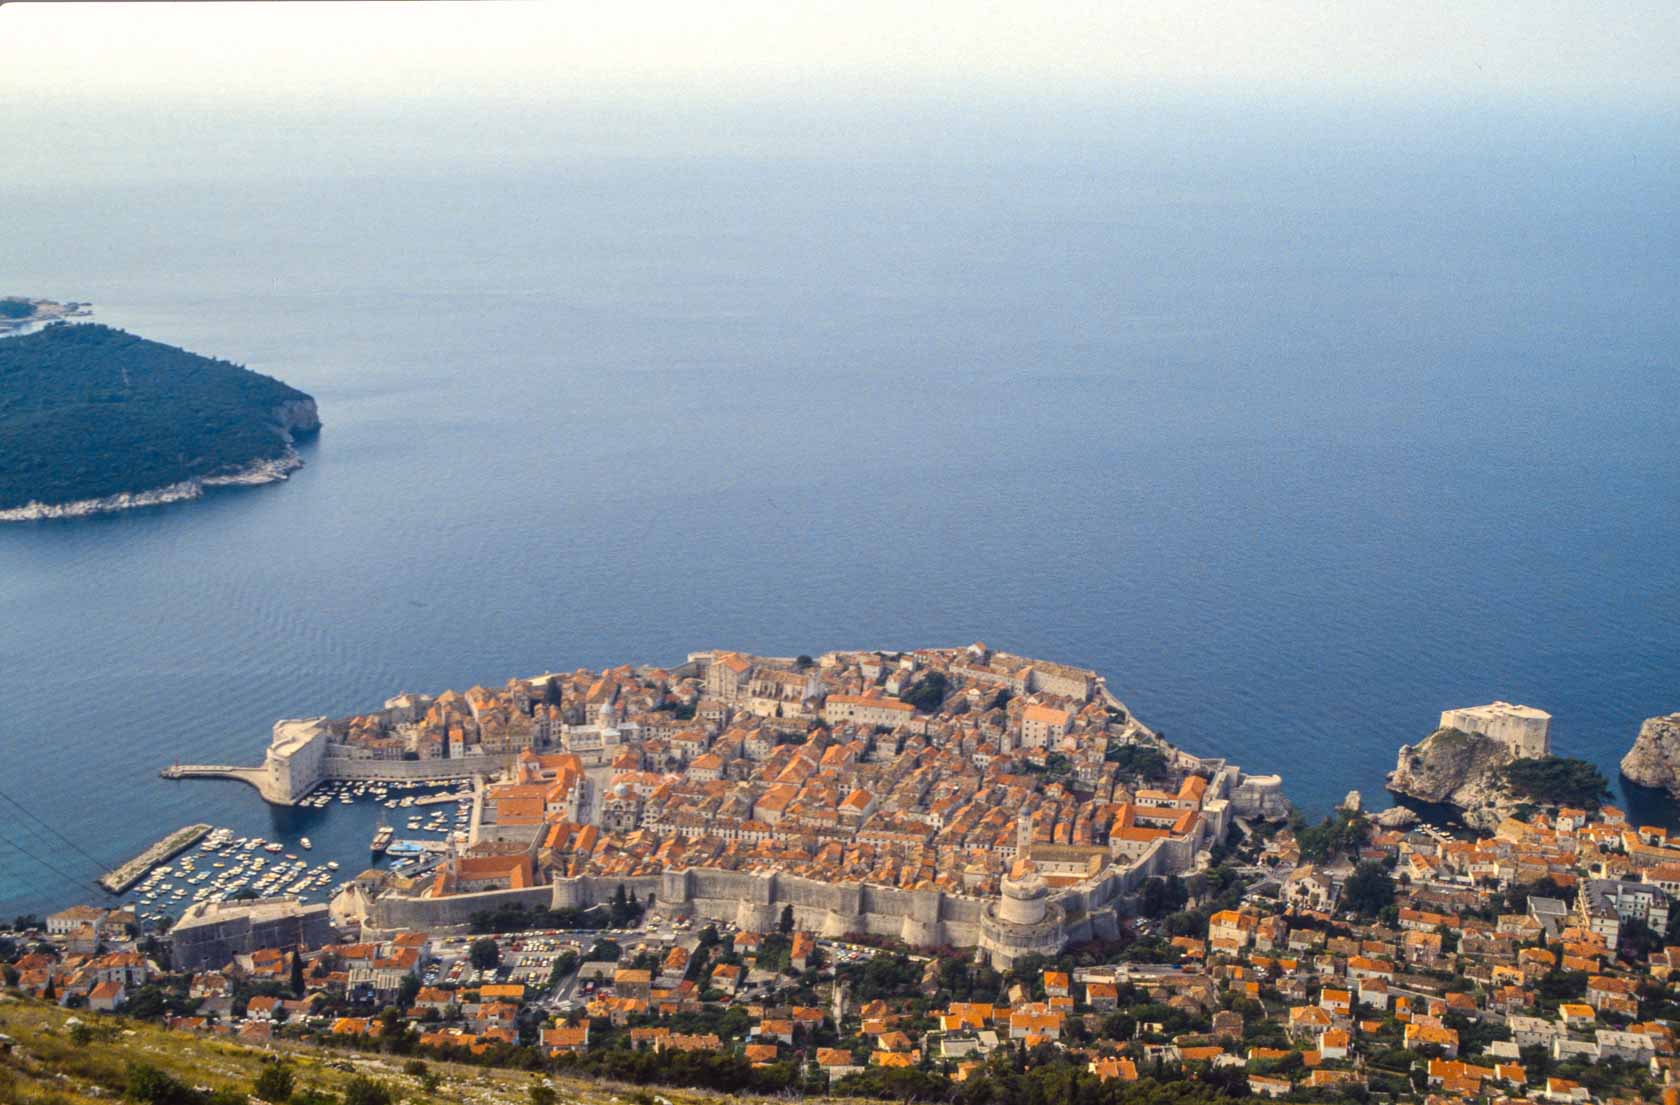 <span style="font-family: Verdana; font-size: 16px; color:">Dubrovnik, oude stad</span>